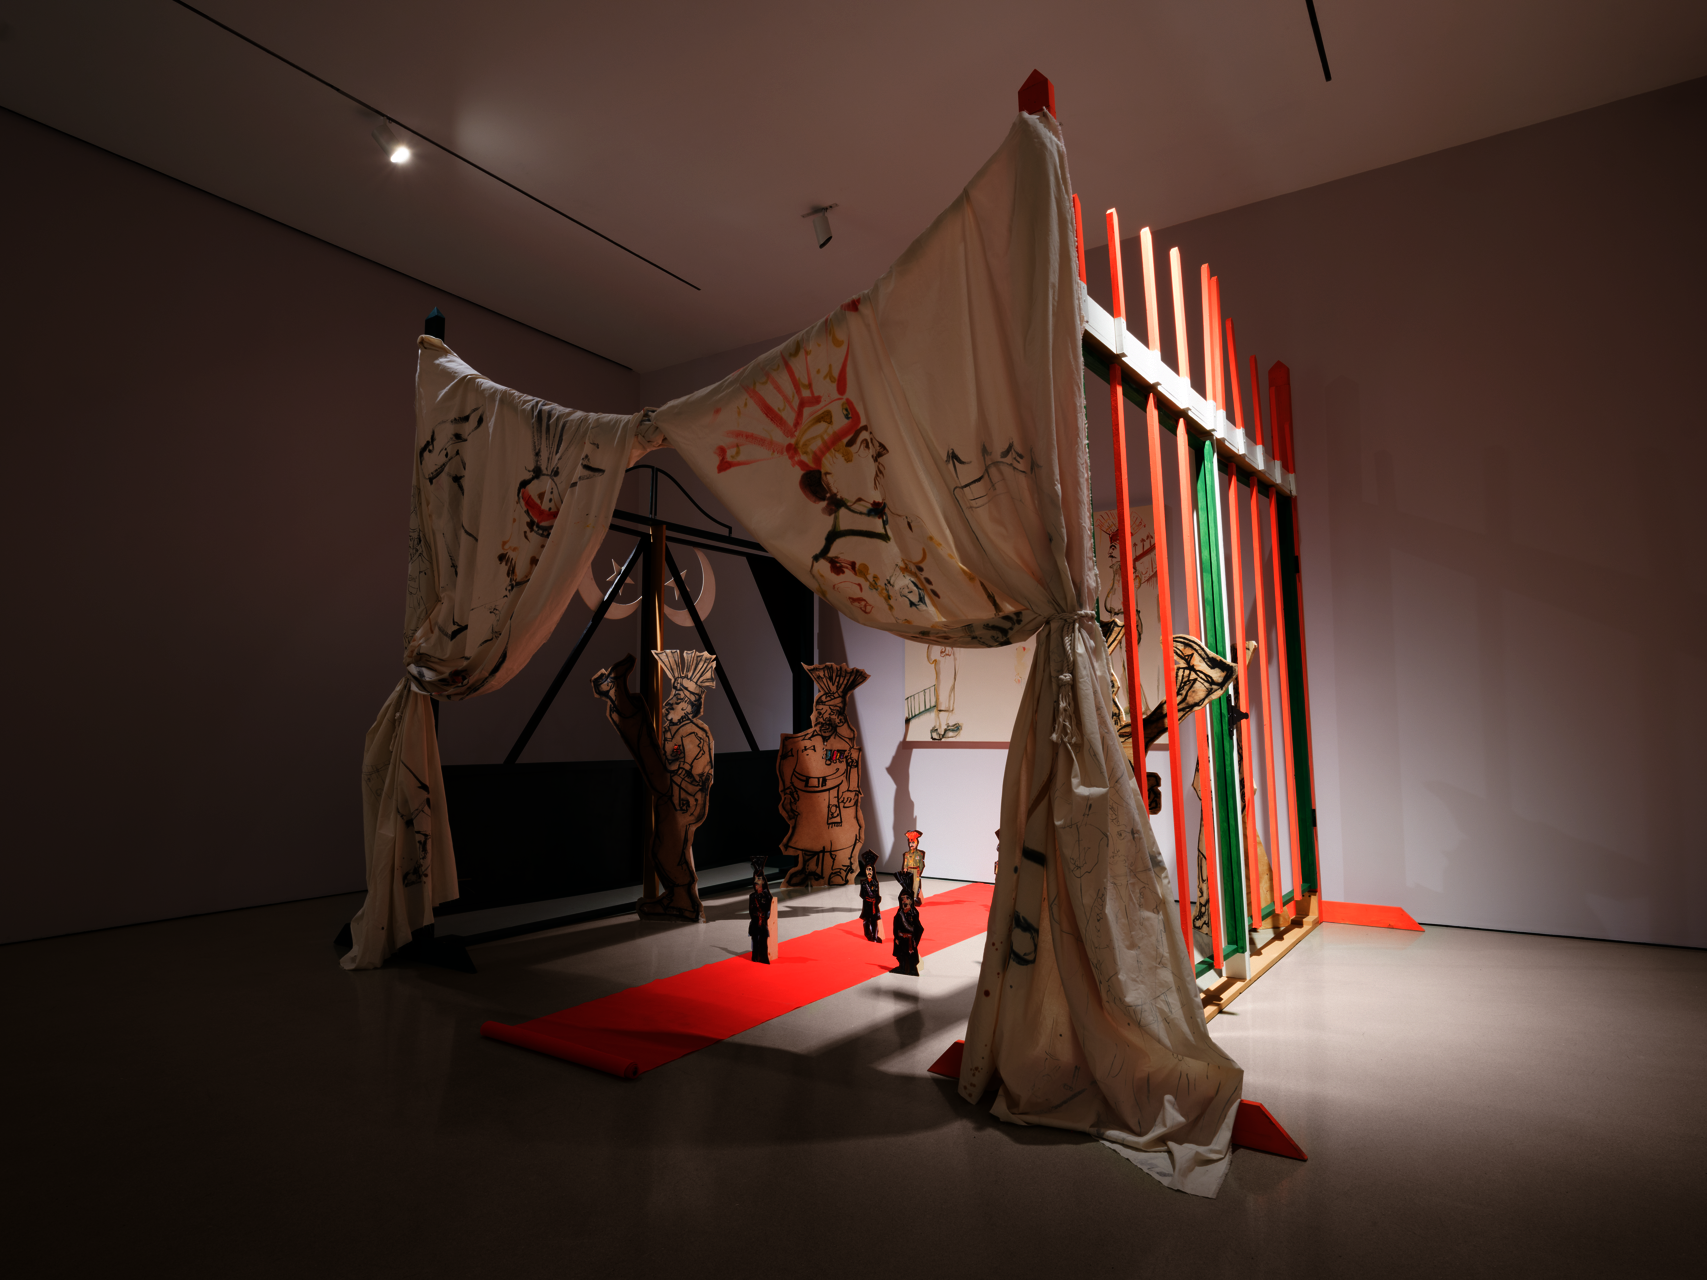 installation comprising oil painting on canvas, masonite, and muslin; charcoal and found fabric on wood cutouts, wooden handmade gates, sound, video performance (05:22), projection, carpet, and hardware